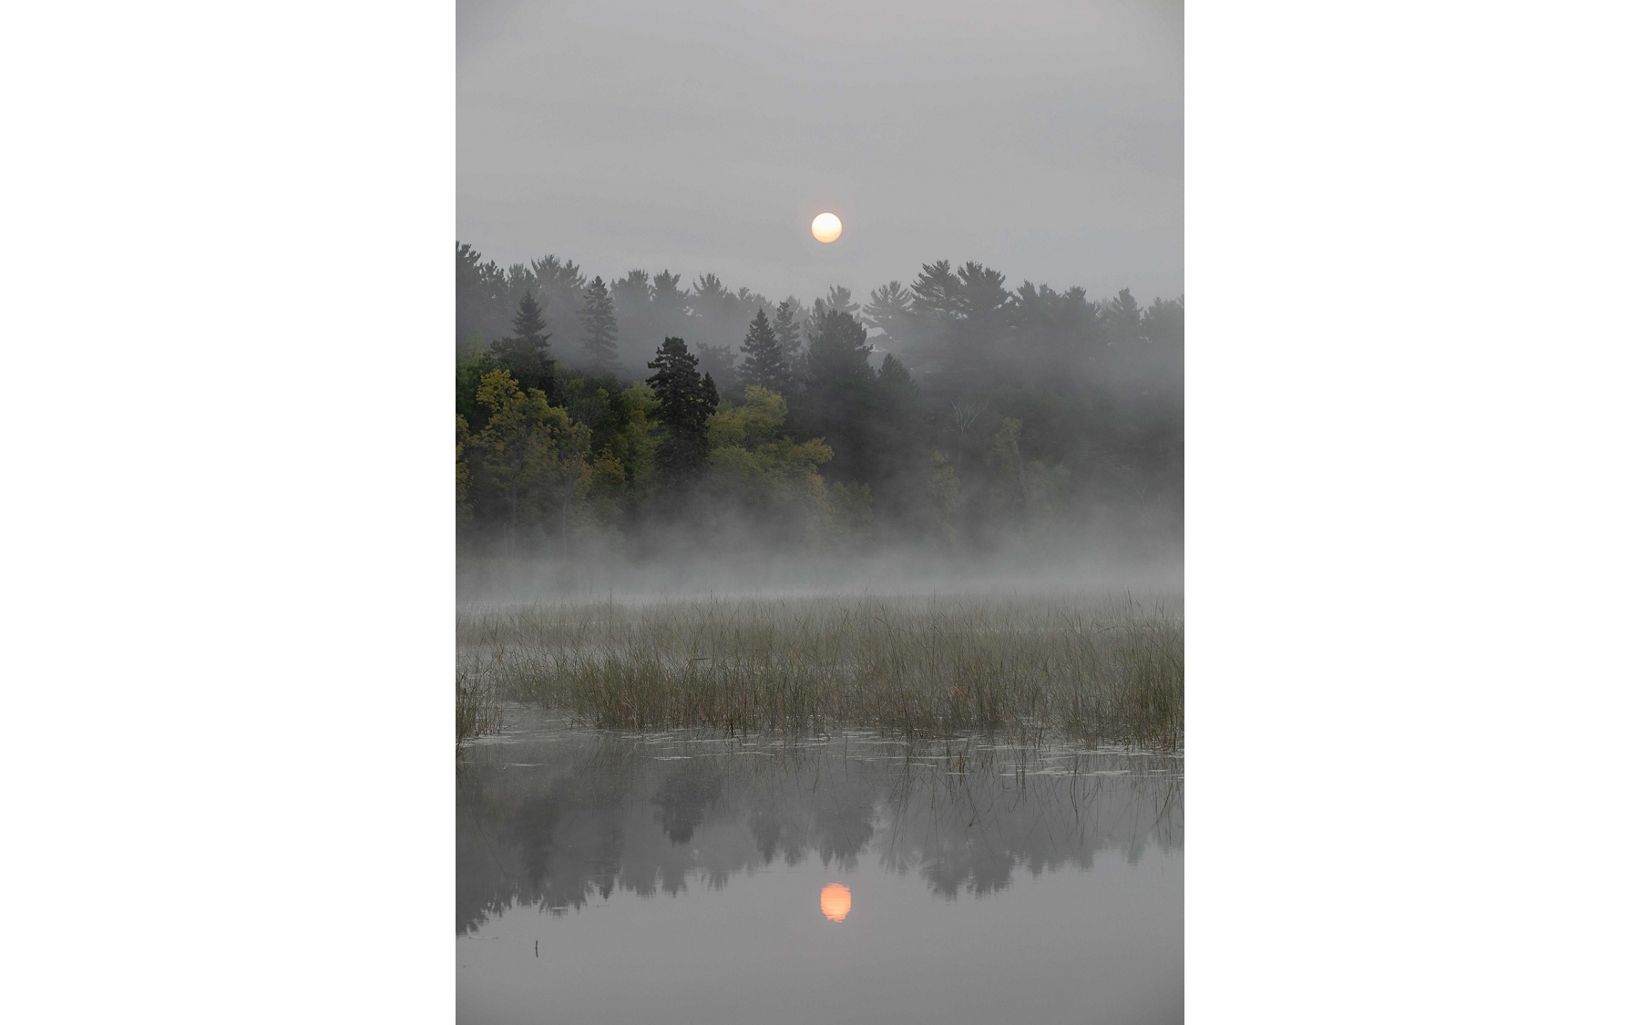 fog rises above water with trees in the background. a hazy sky dulls the sun in the center of the image and the sun is reflected in the water. 